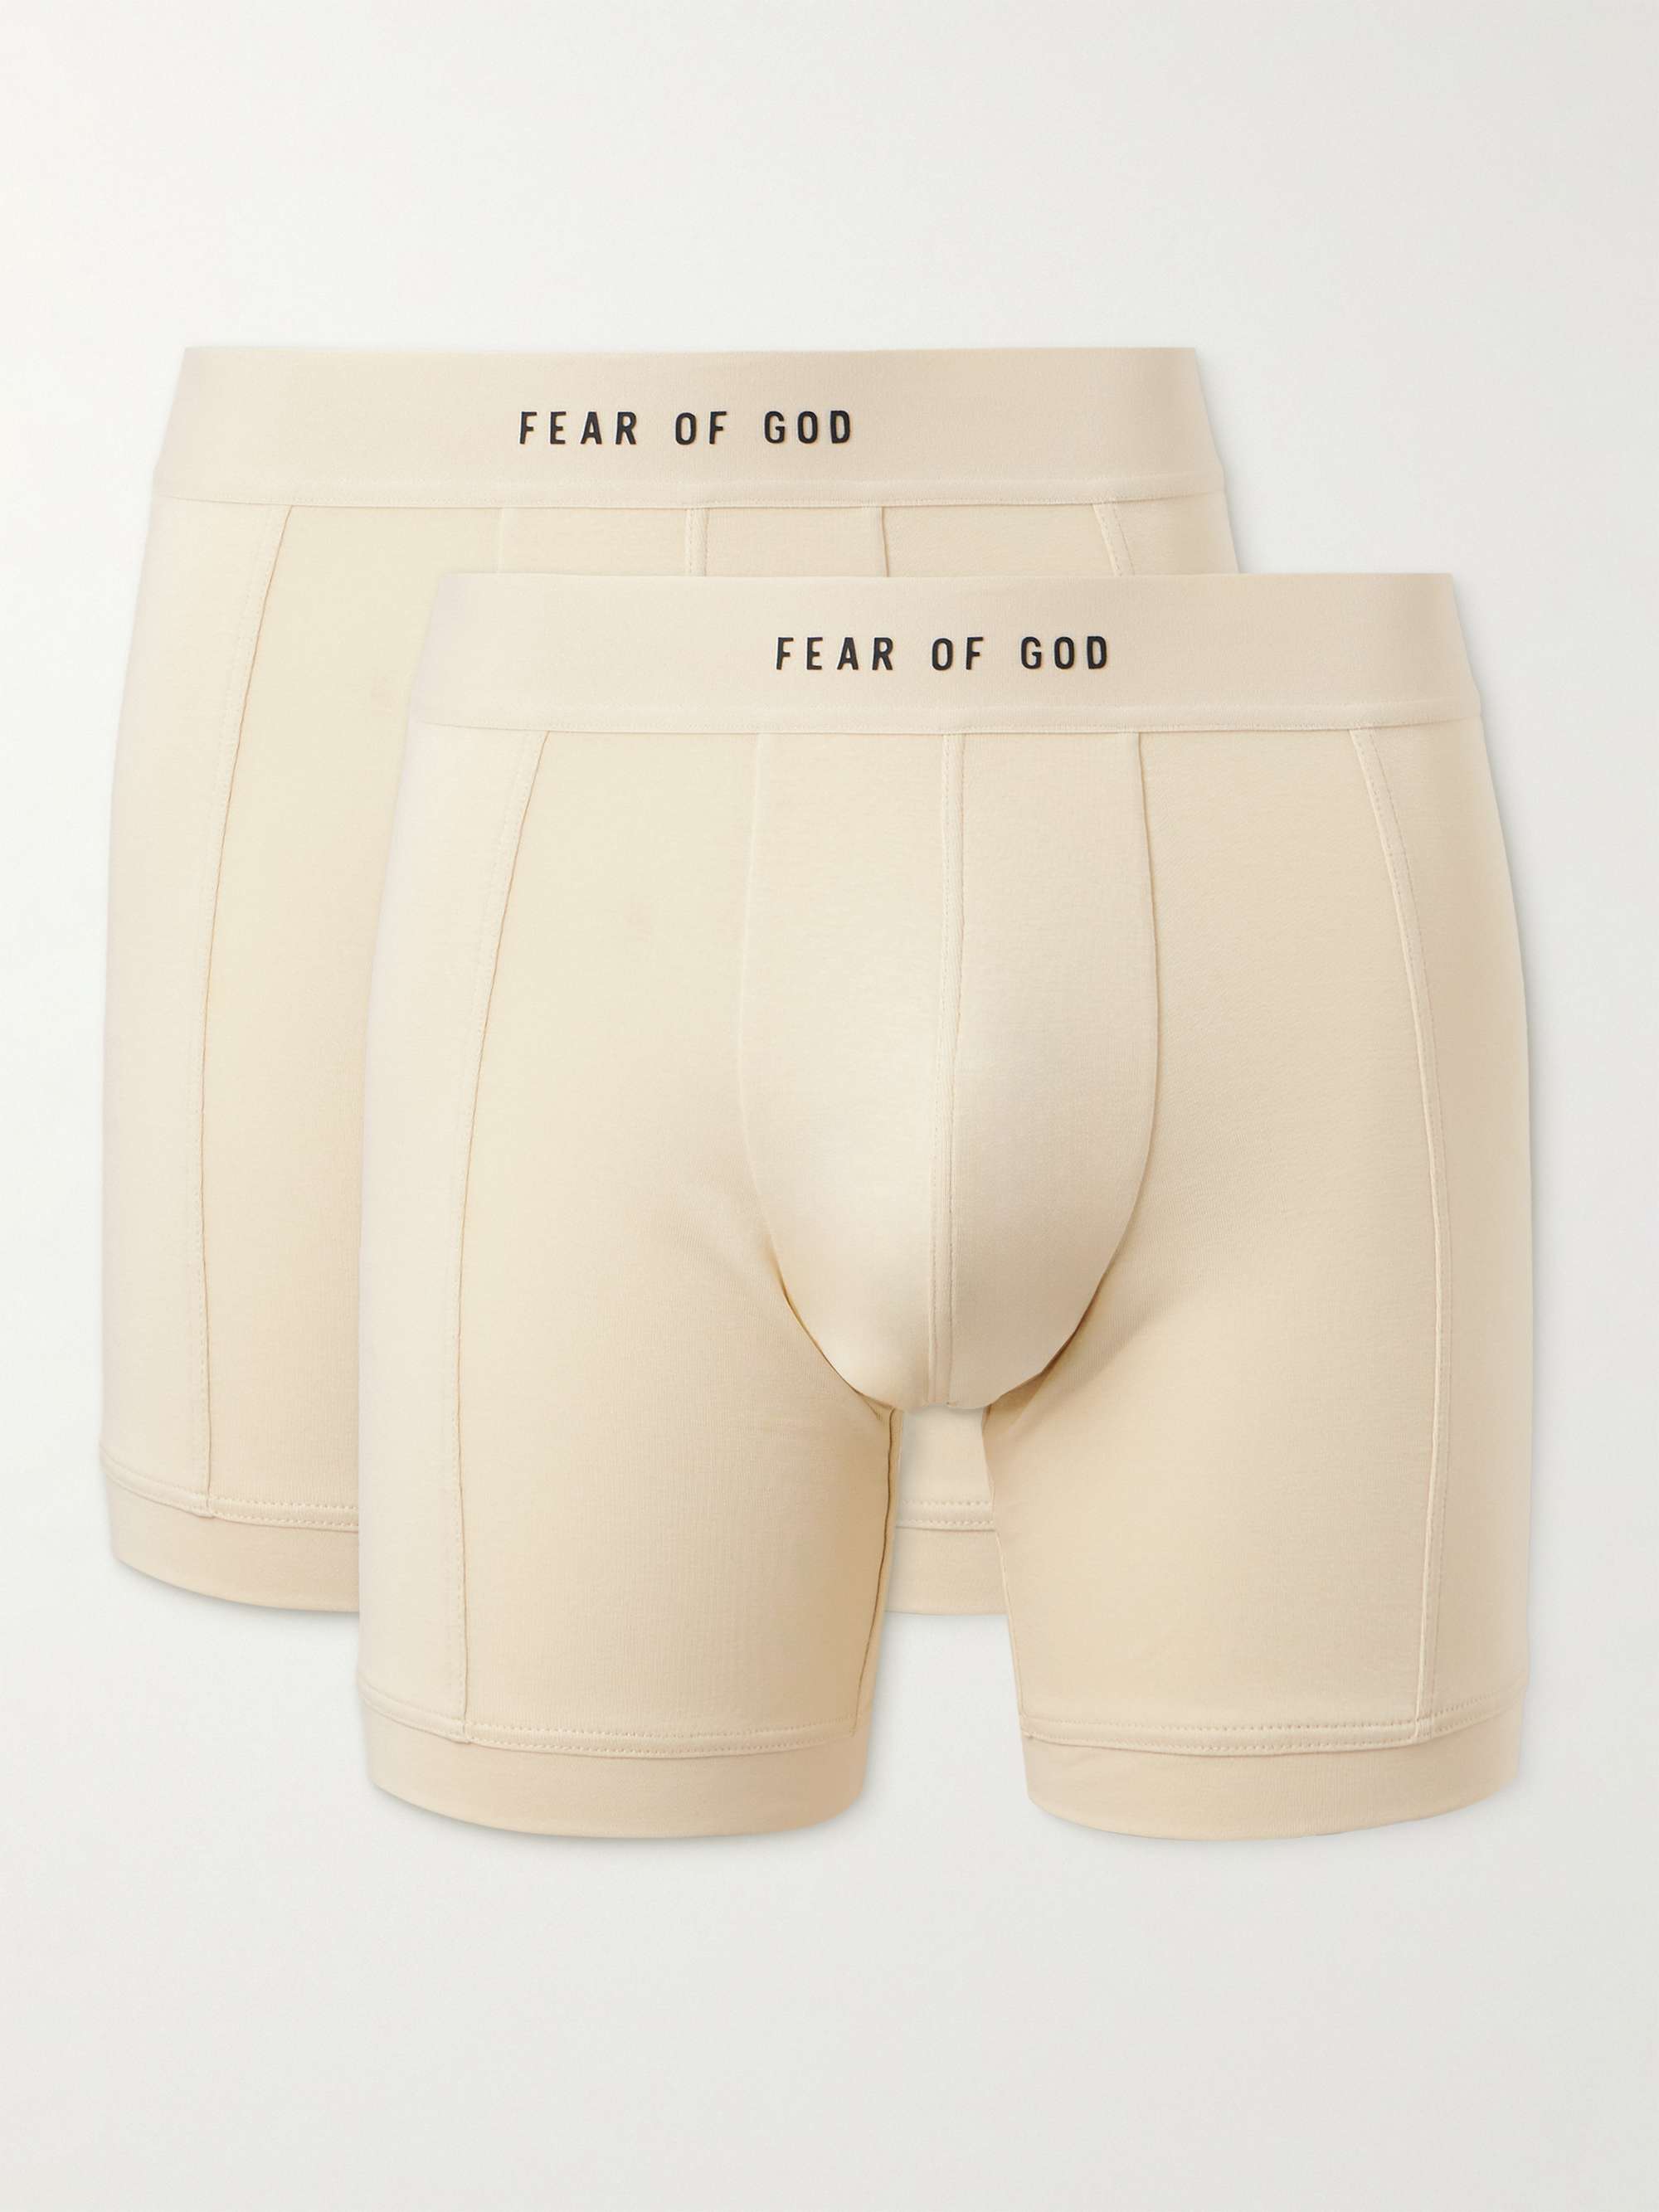 FEAR OF GOD Two-Pack Stretch-Cotton Jersey Boxer Briefs for Men